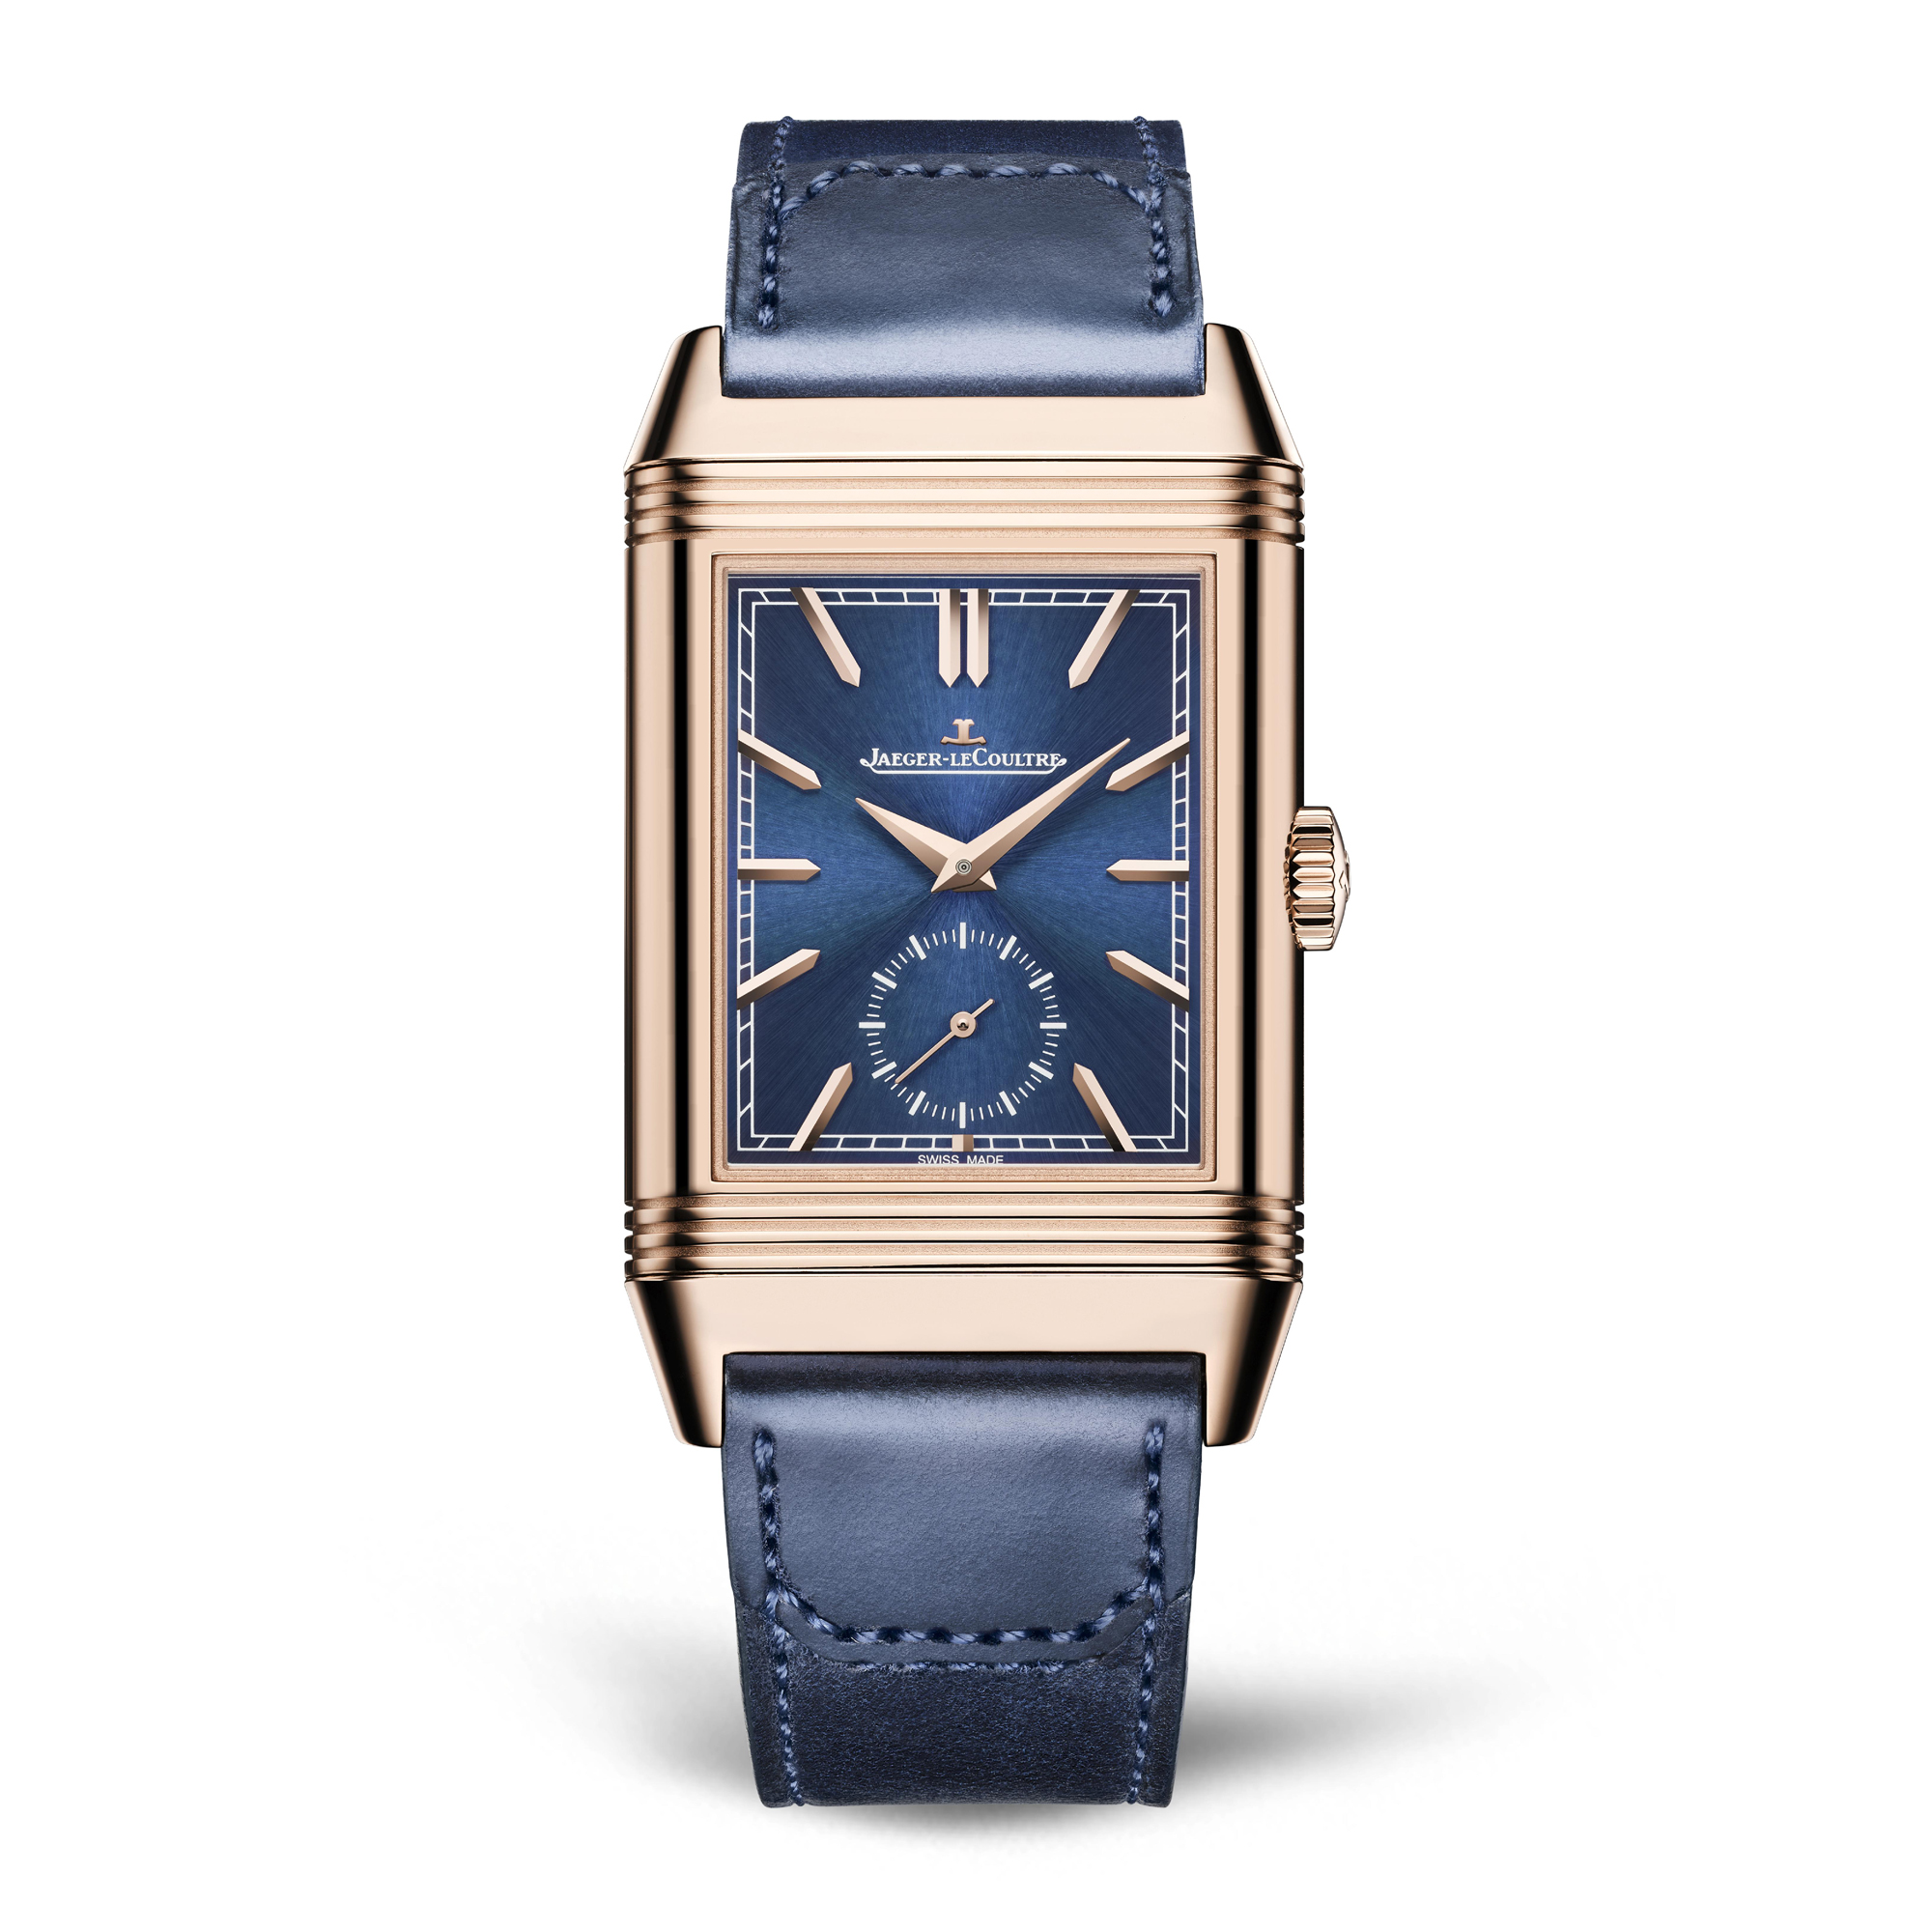 The special boutique-only edition comes in a limited series of 100 pieces. The two textured dials come encased in pink gold. The front dial is a blue sunray-brushed hue.